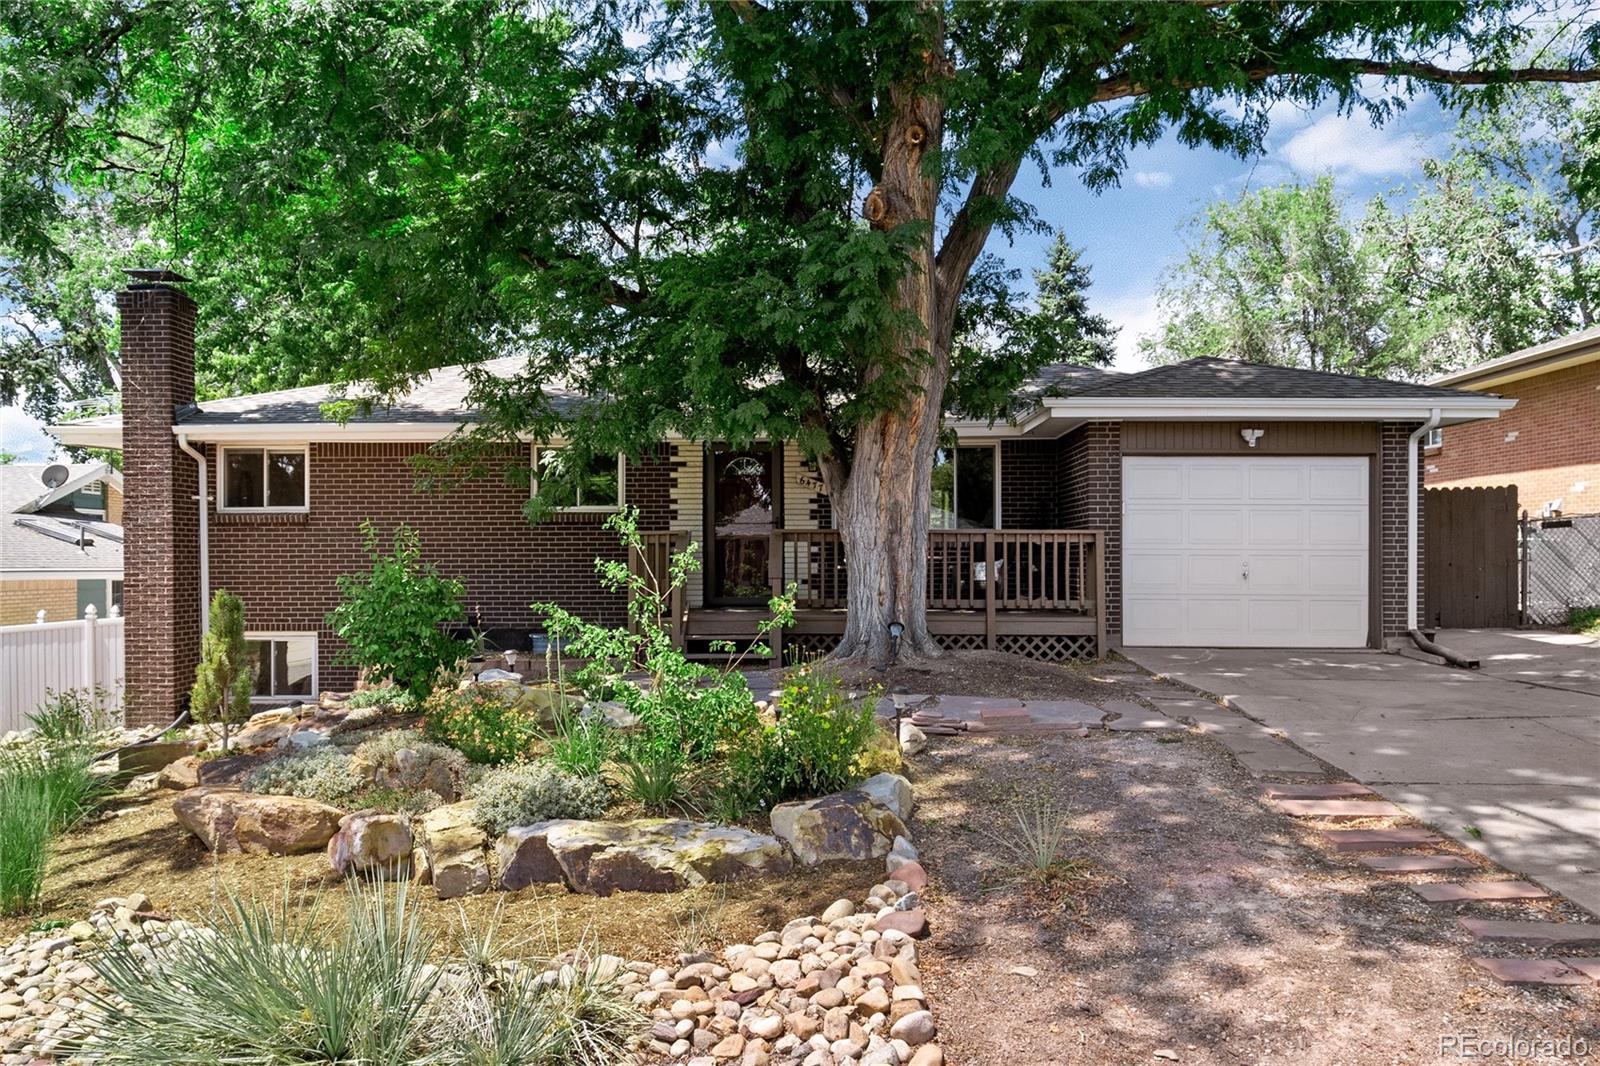 6477  ammons street, Arvada sold home. Closed on 2024-02-09 for $624,900.